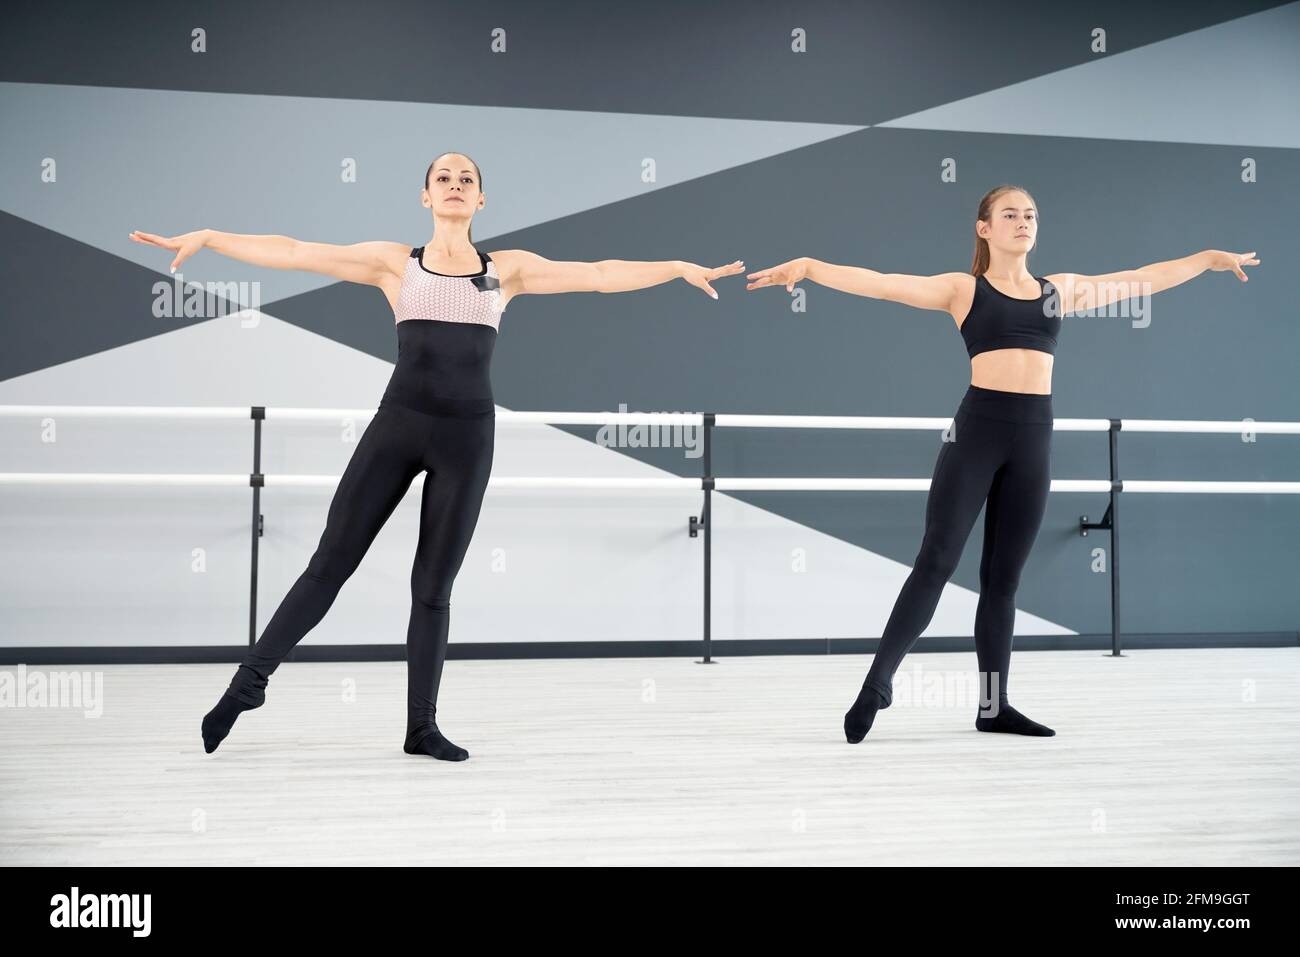 Adult female instructor helping young girl in black sportswear learn choreographic move. Two synchronized women practicing in hall, hi tech interior. Choreography, gymnastics concept. Stock Photo